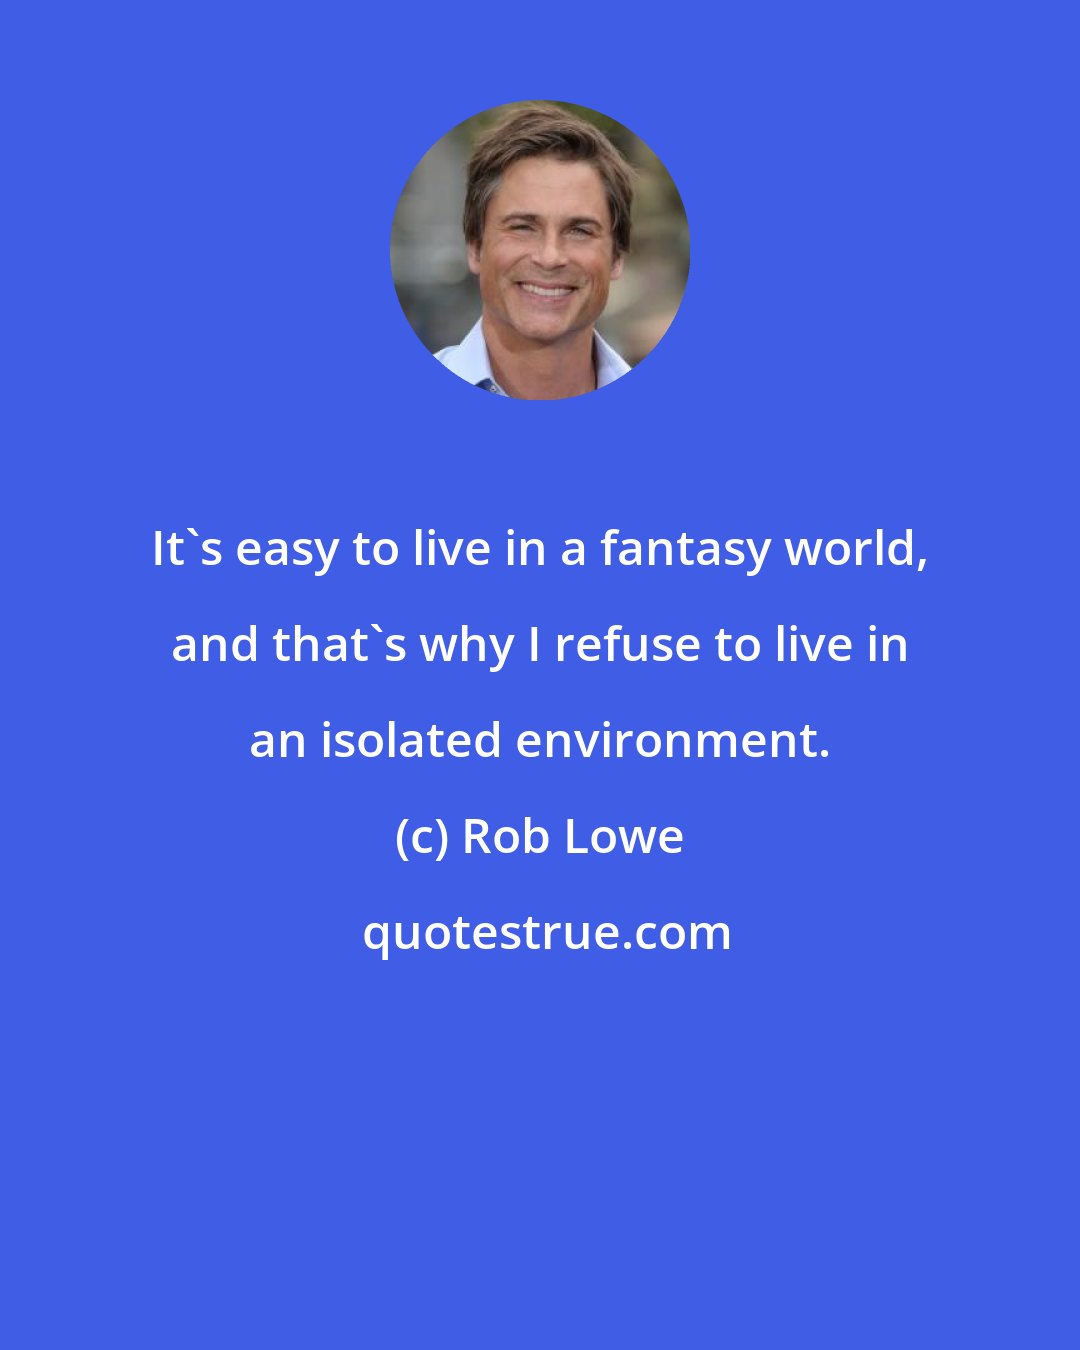 Rob Lowe: It's easy to live in a fantasy world, and that's why I refuse to live in an isolated environment.